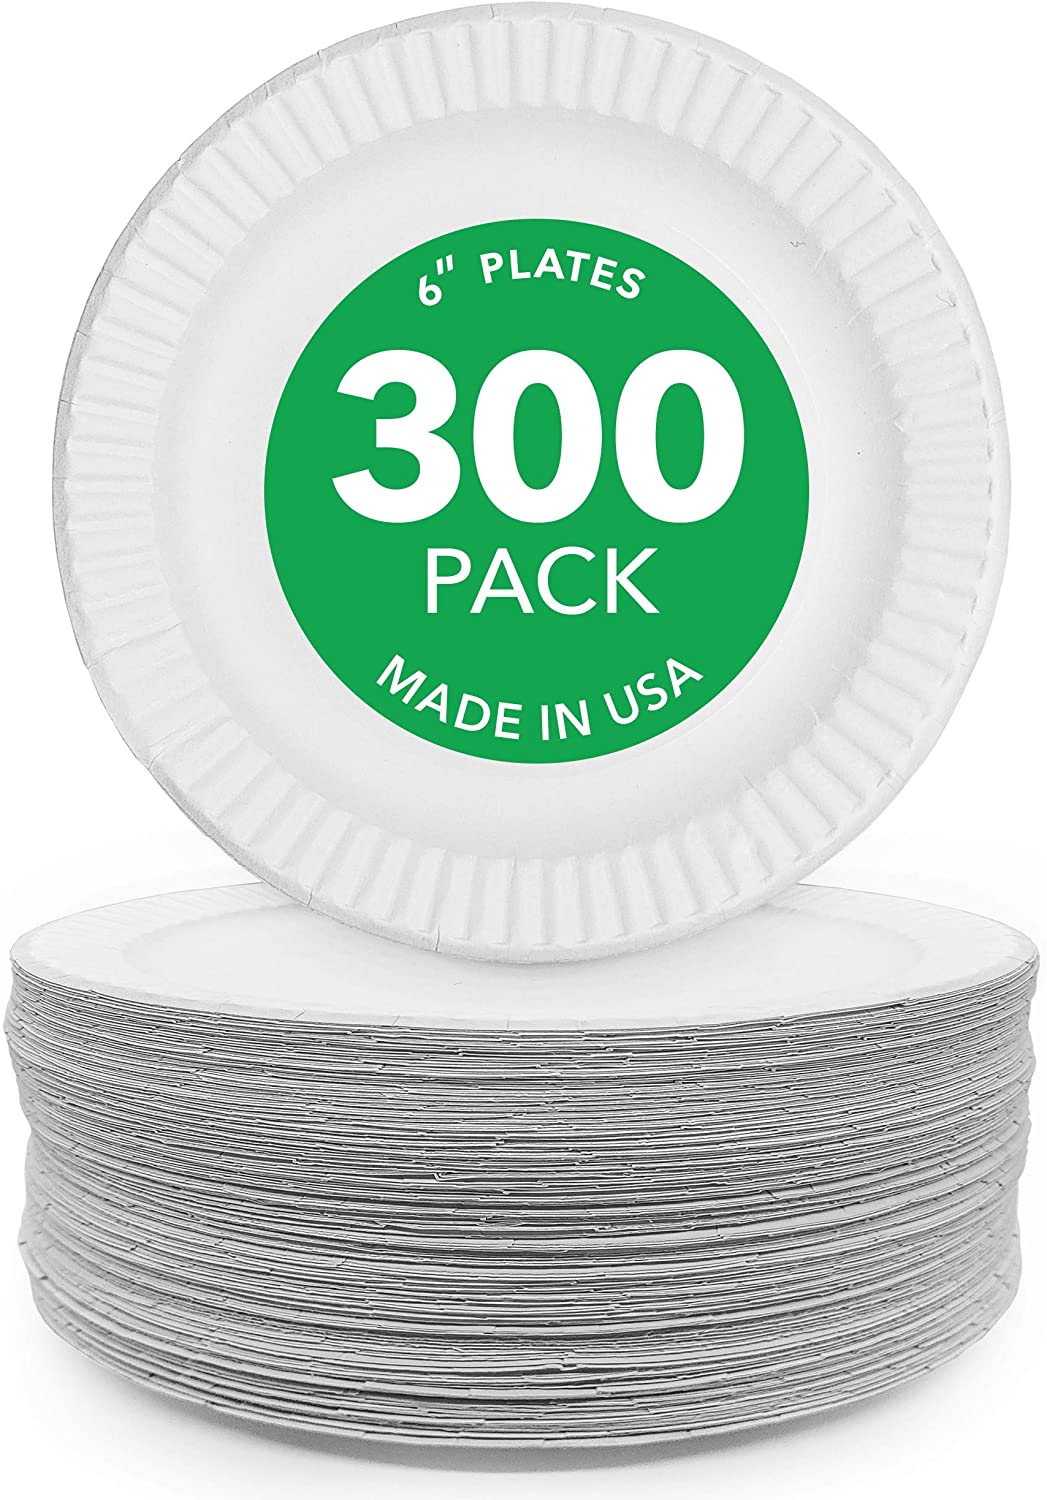 Stock Your Home 9-Inch Paper Plates Uncoated, White, 500 Count 